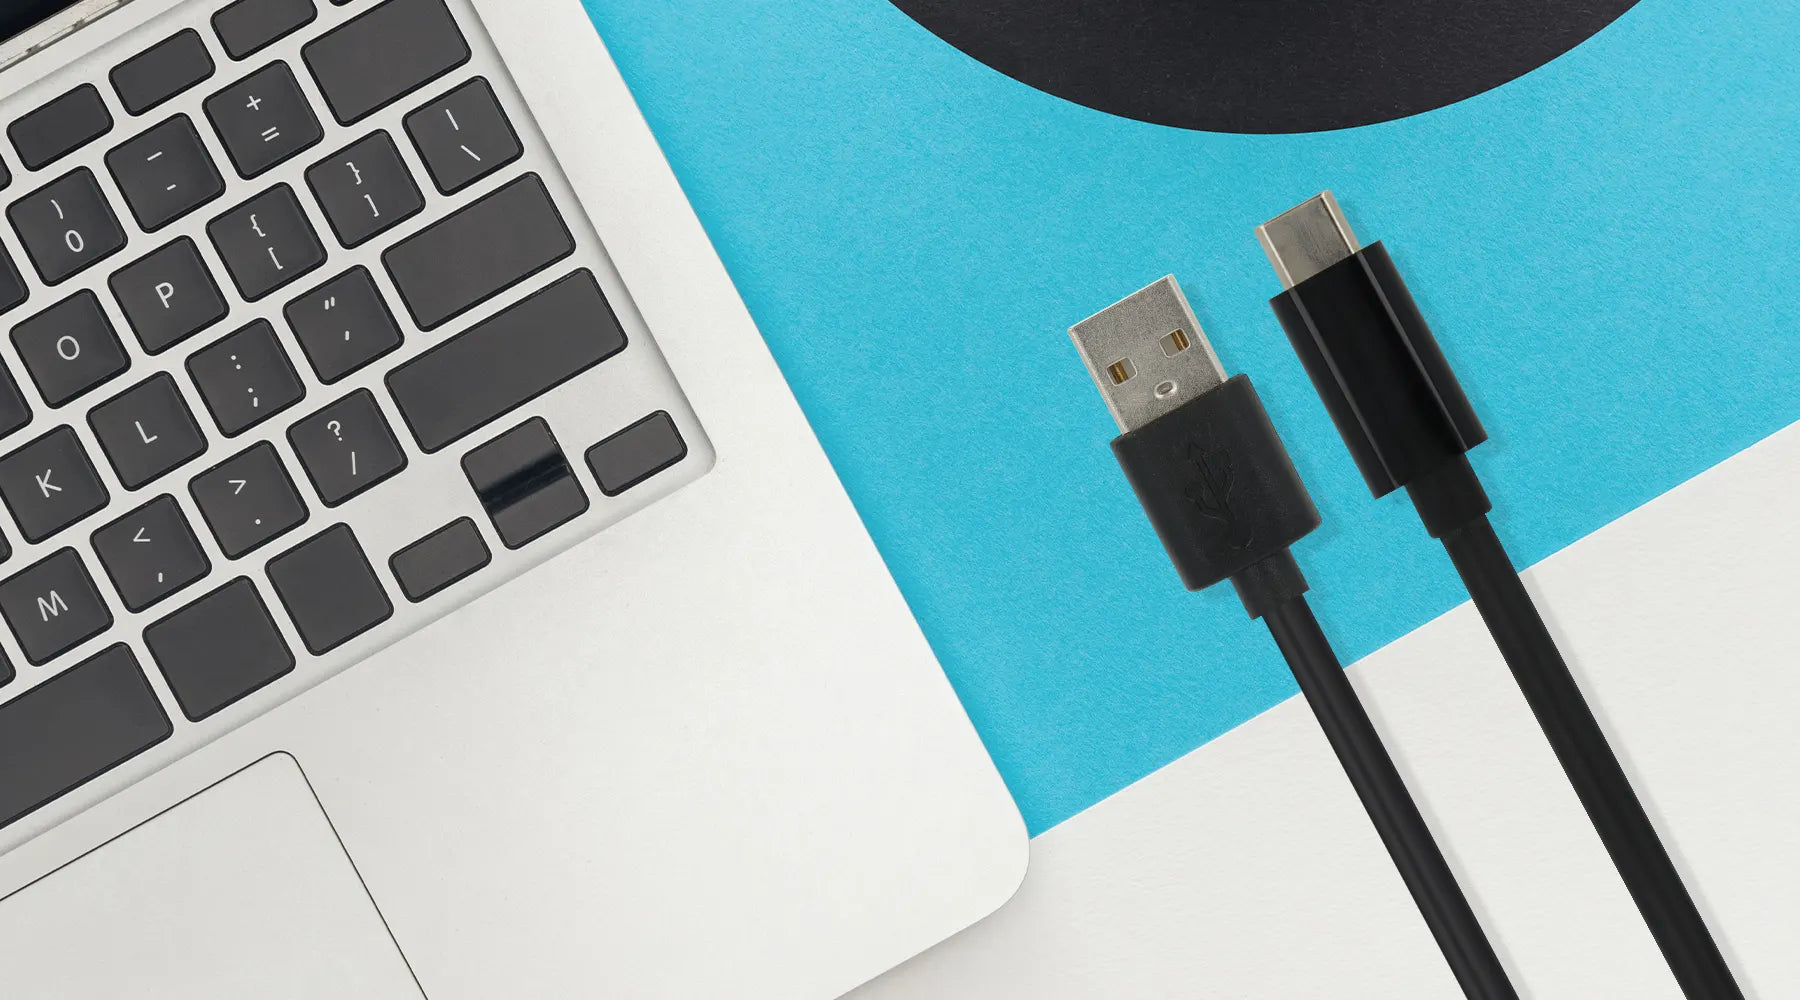 USB-C vs. USB-A: What's the difference?